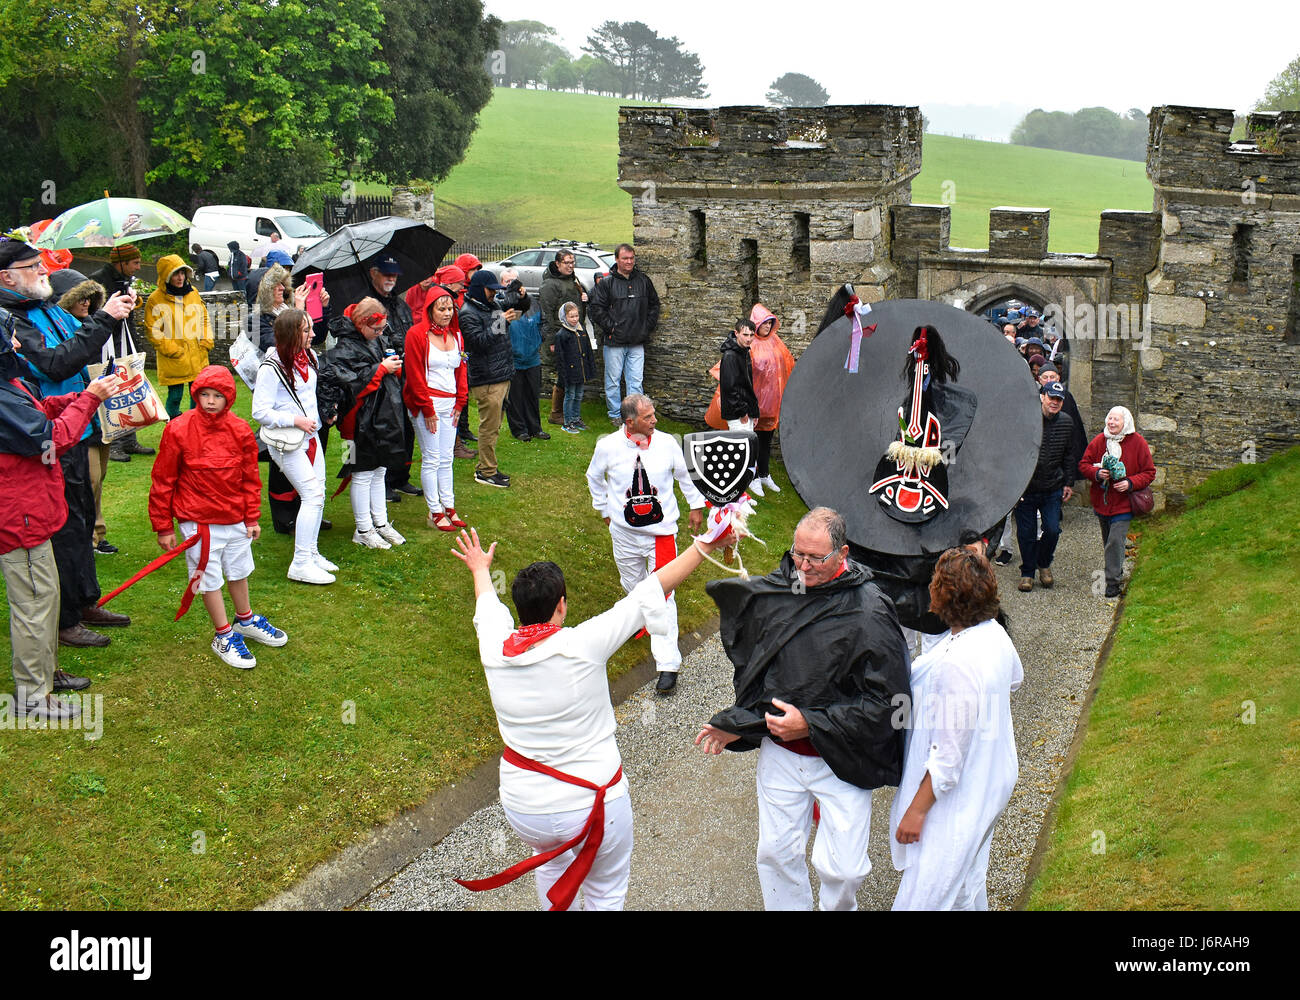 Padstow, Cornwall, UK. 1st May 2016. The Red Oss arrives at Prideaux Place in Padstow during the May Day Obby Oss celebrations. Stock Photo